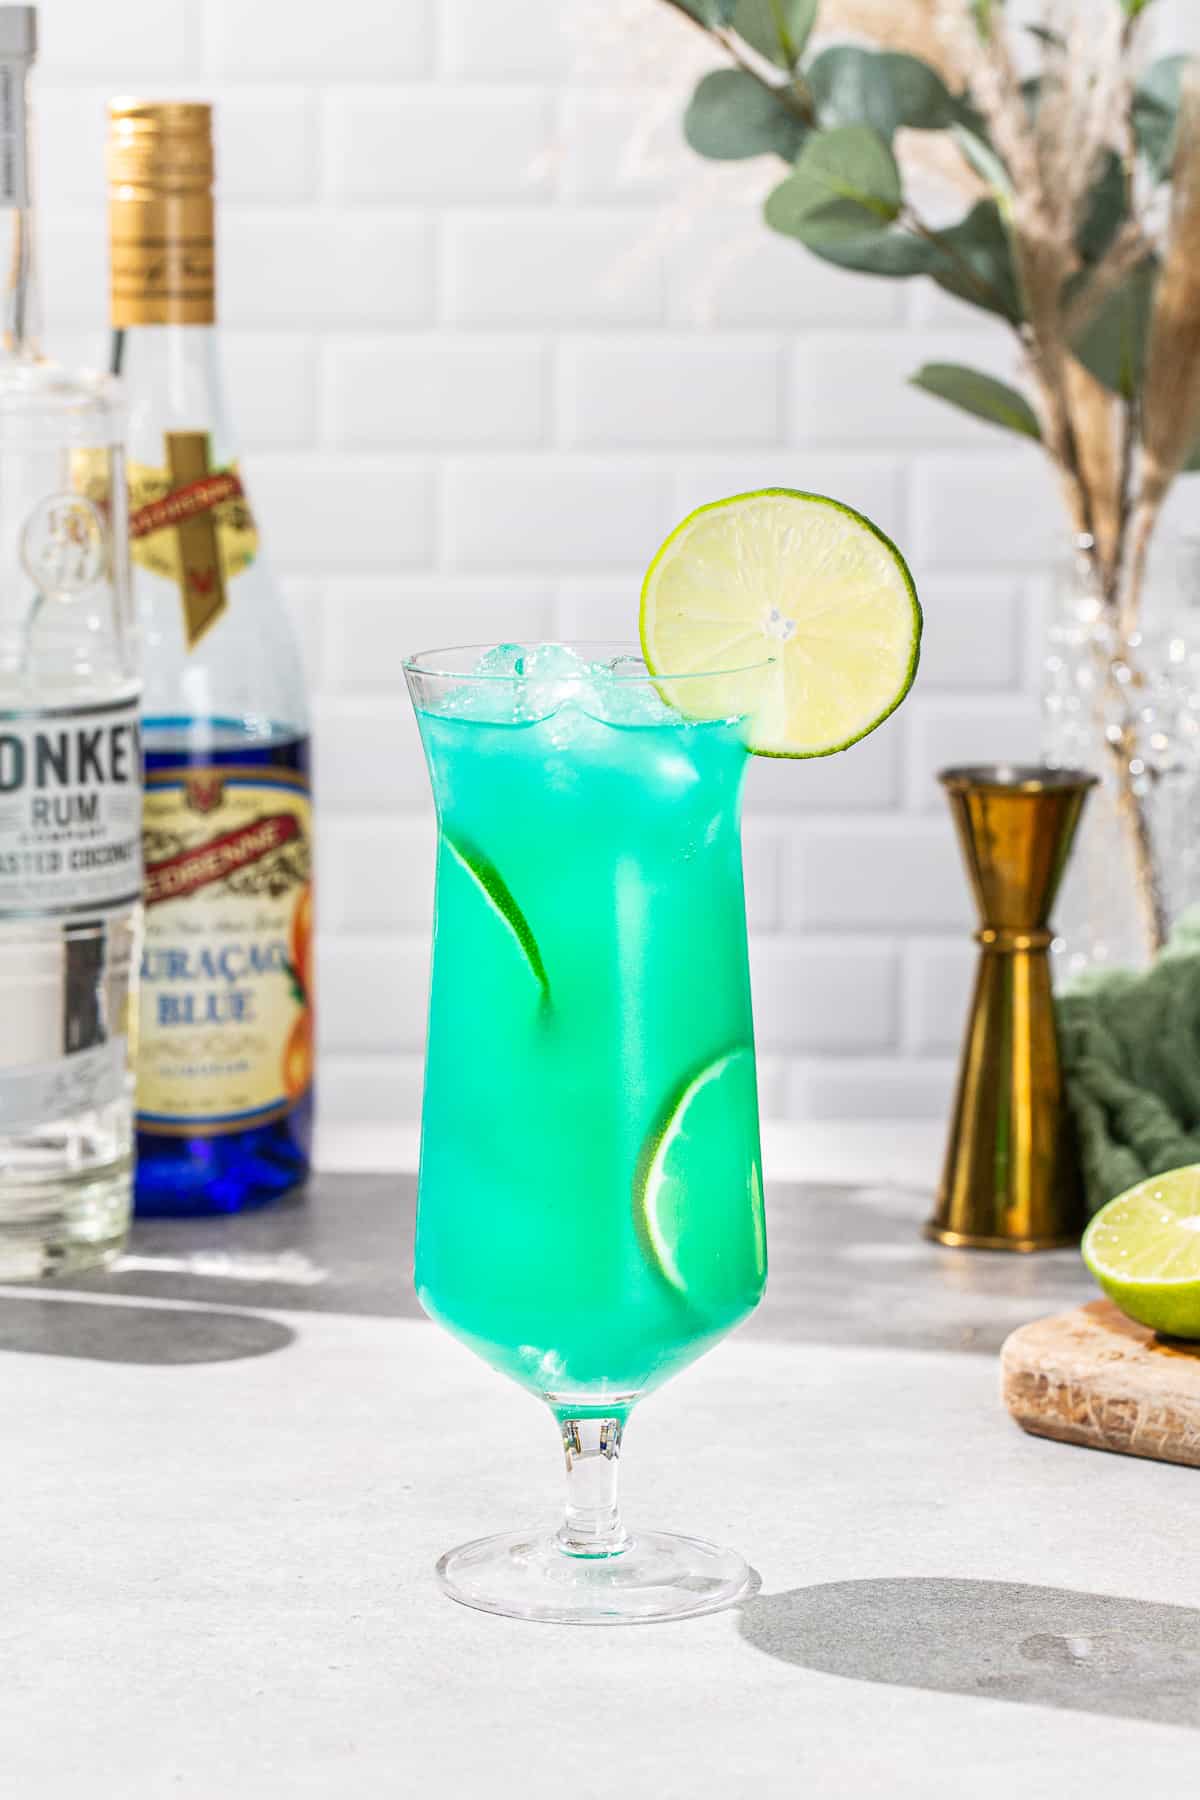 Side view of a Mermaid Water cocktail in a hurricane glass. The drink is vibrant aqua with lime slices as garnish. In the background are bar tools and ingredients to make the drink.